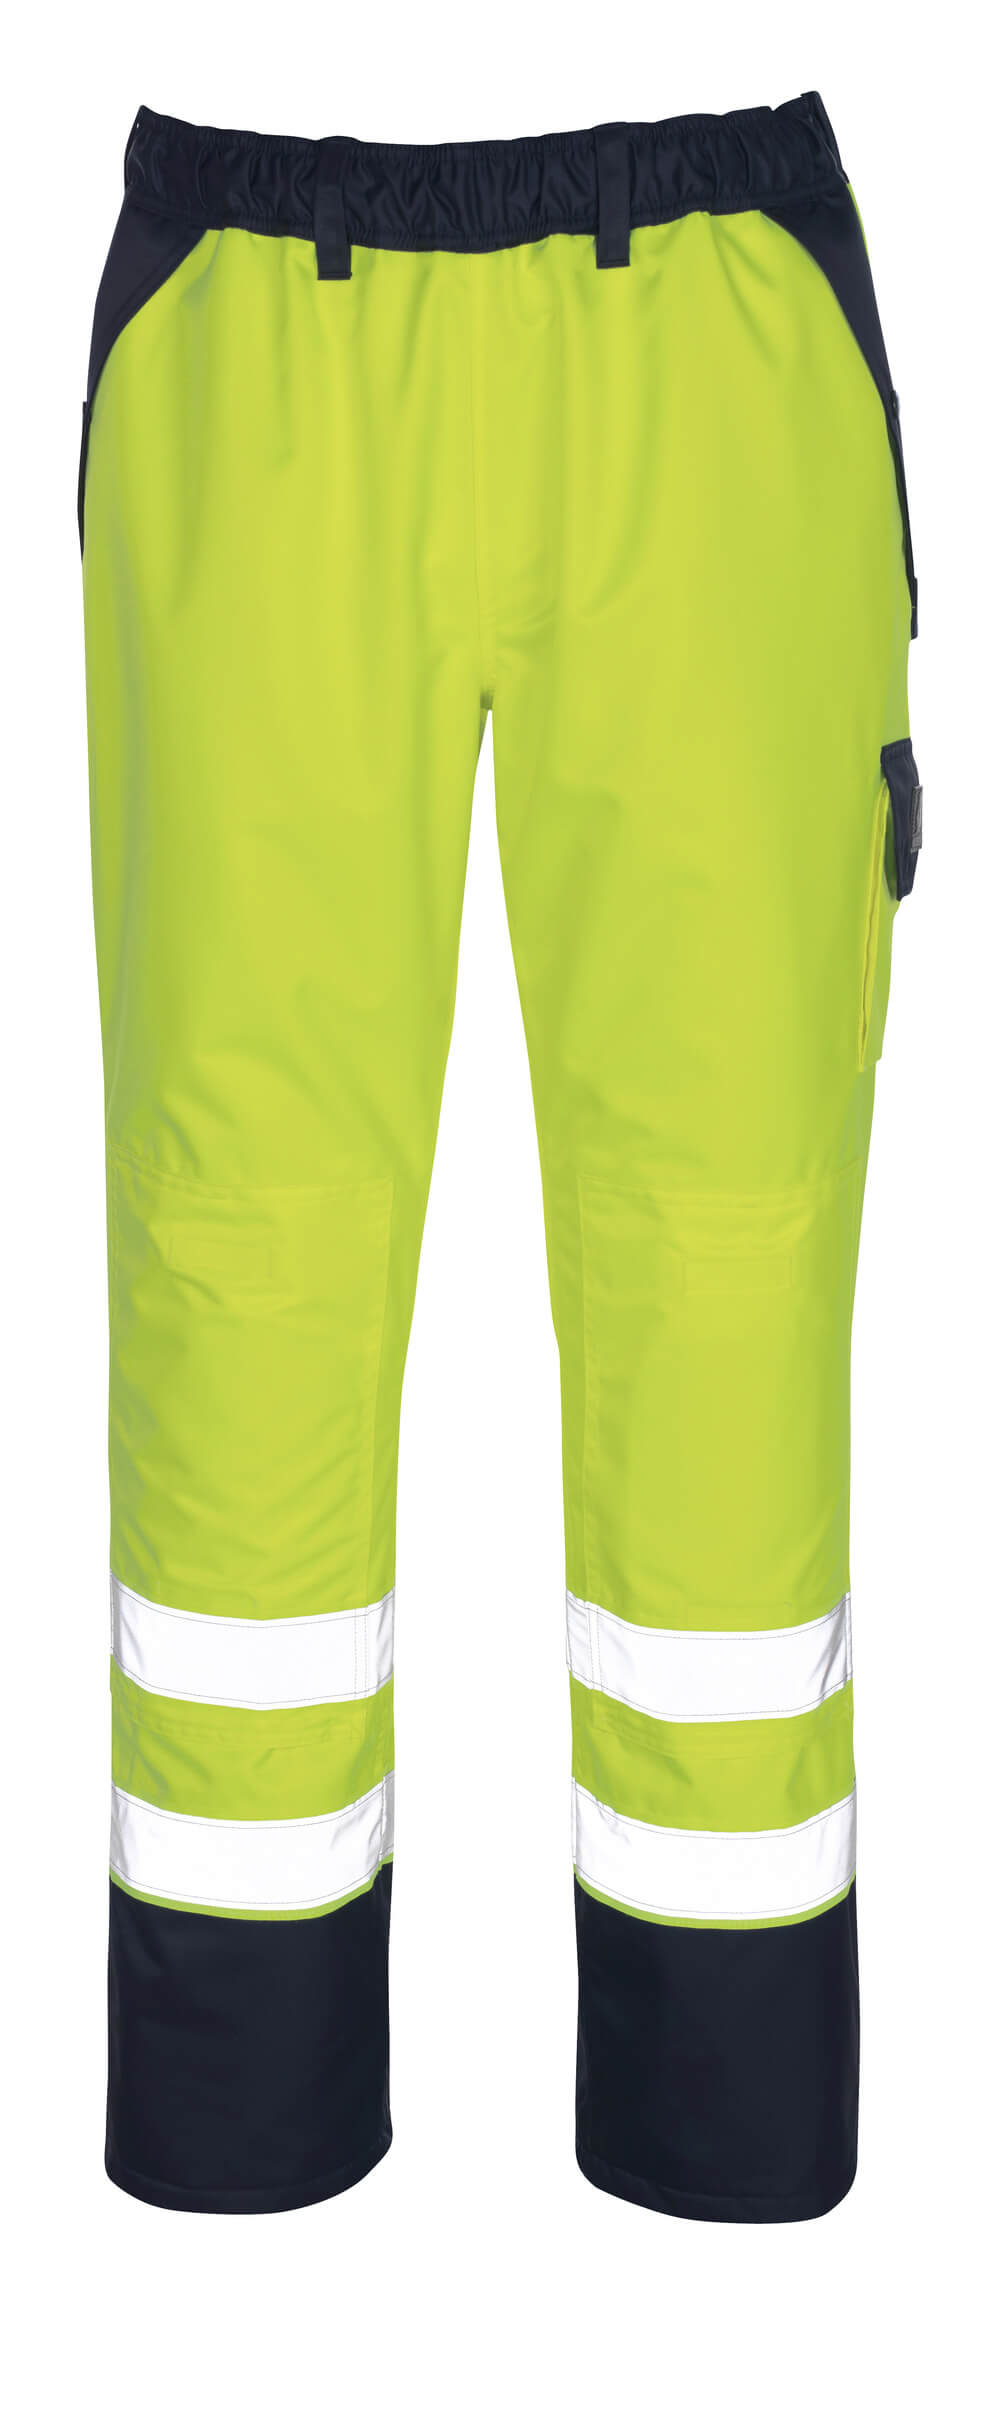 Mascot SAFE IMAGE  Linz Over Trousers 07090 hi-vis yellow/navy